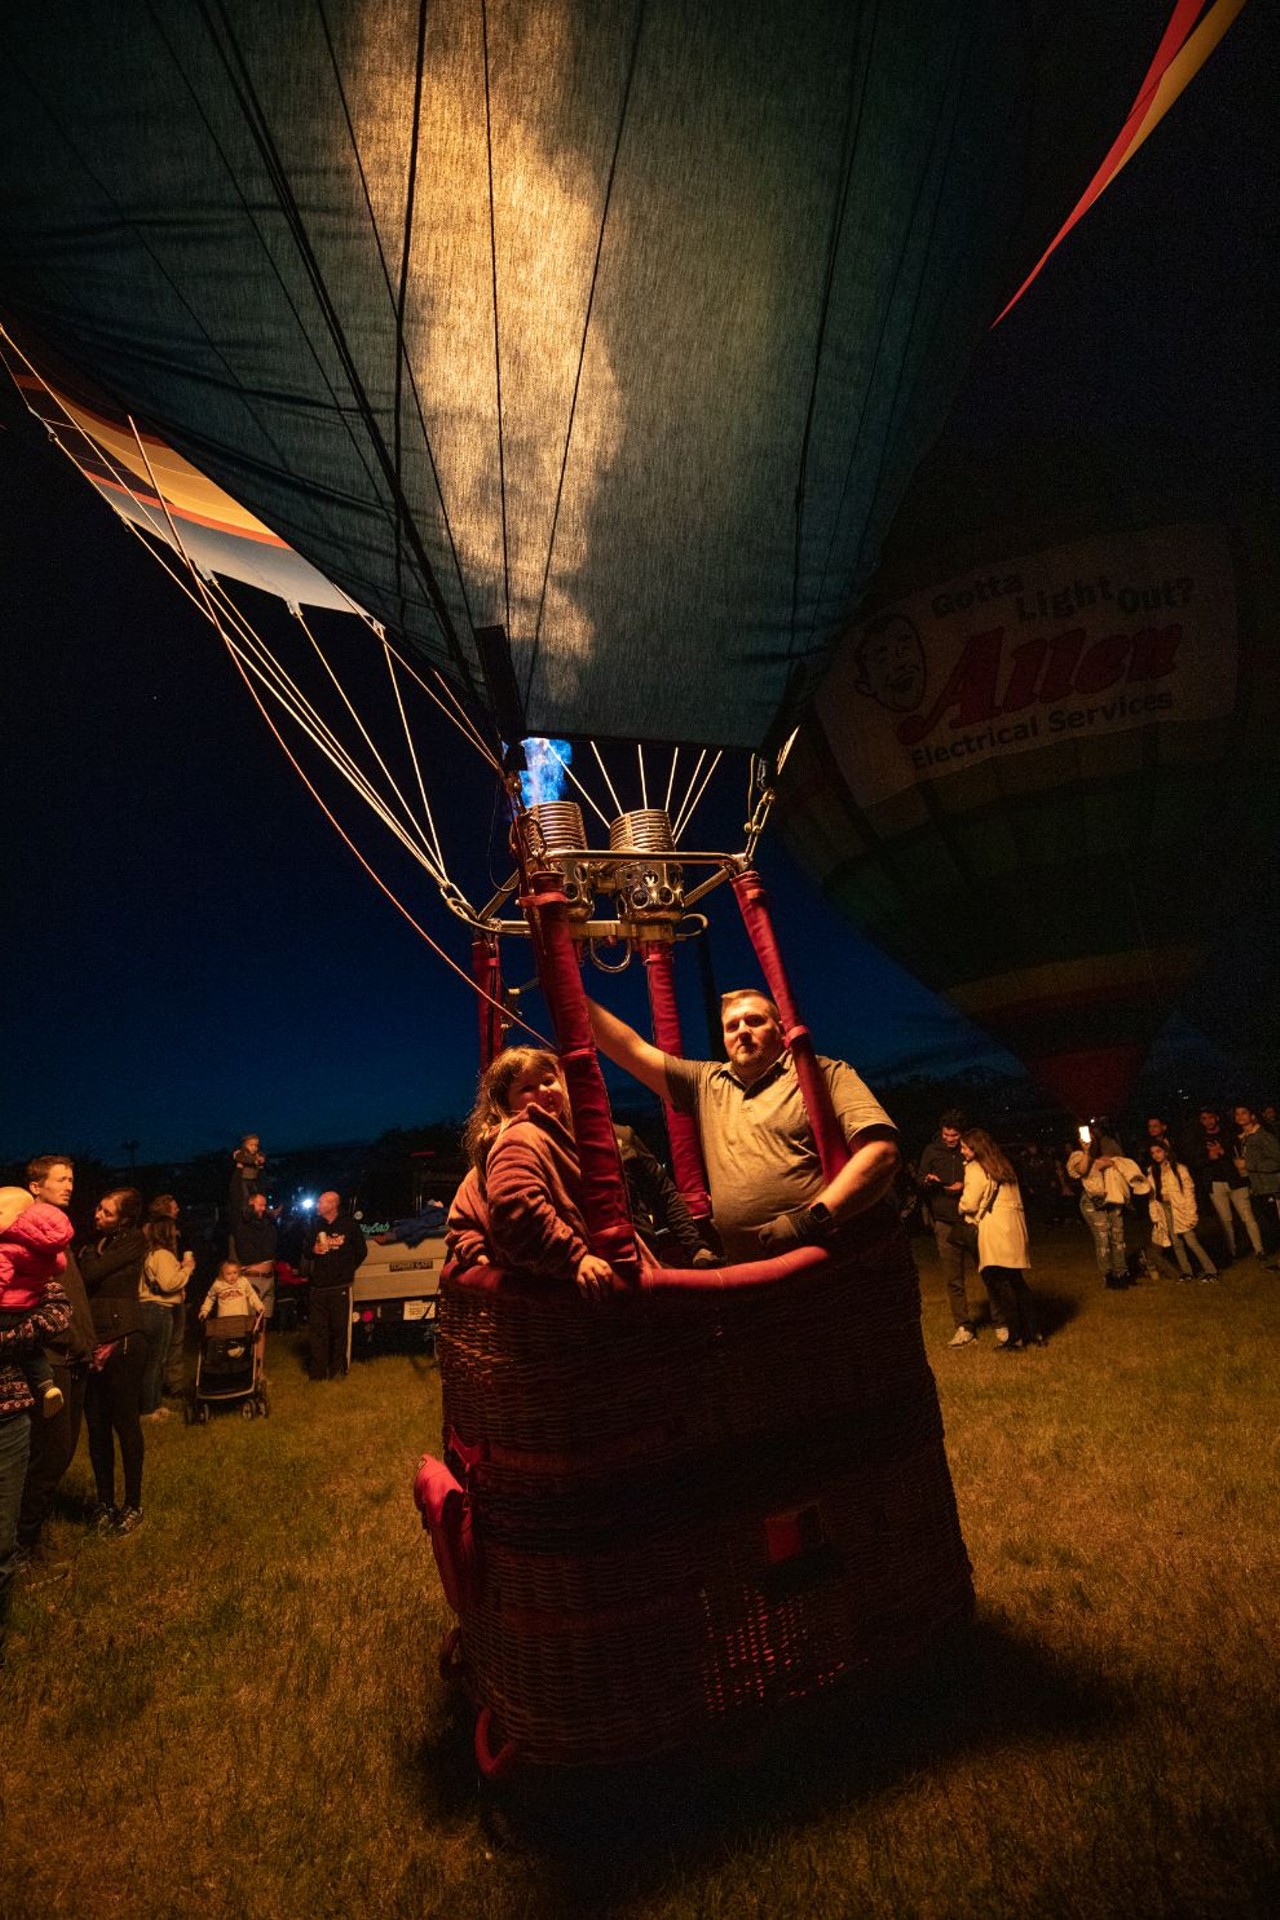 [Photos] The Kentucky Derby Festival Great Balloon Glow, Waterfront Park on Friday, April 28